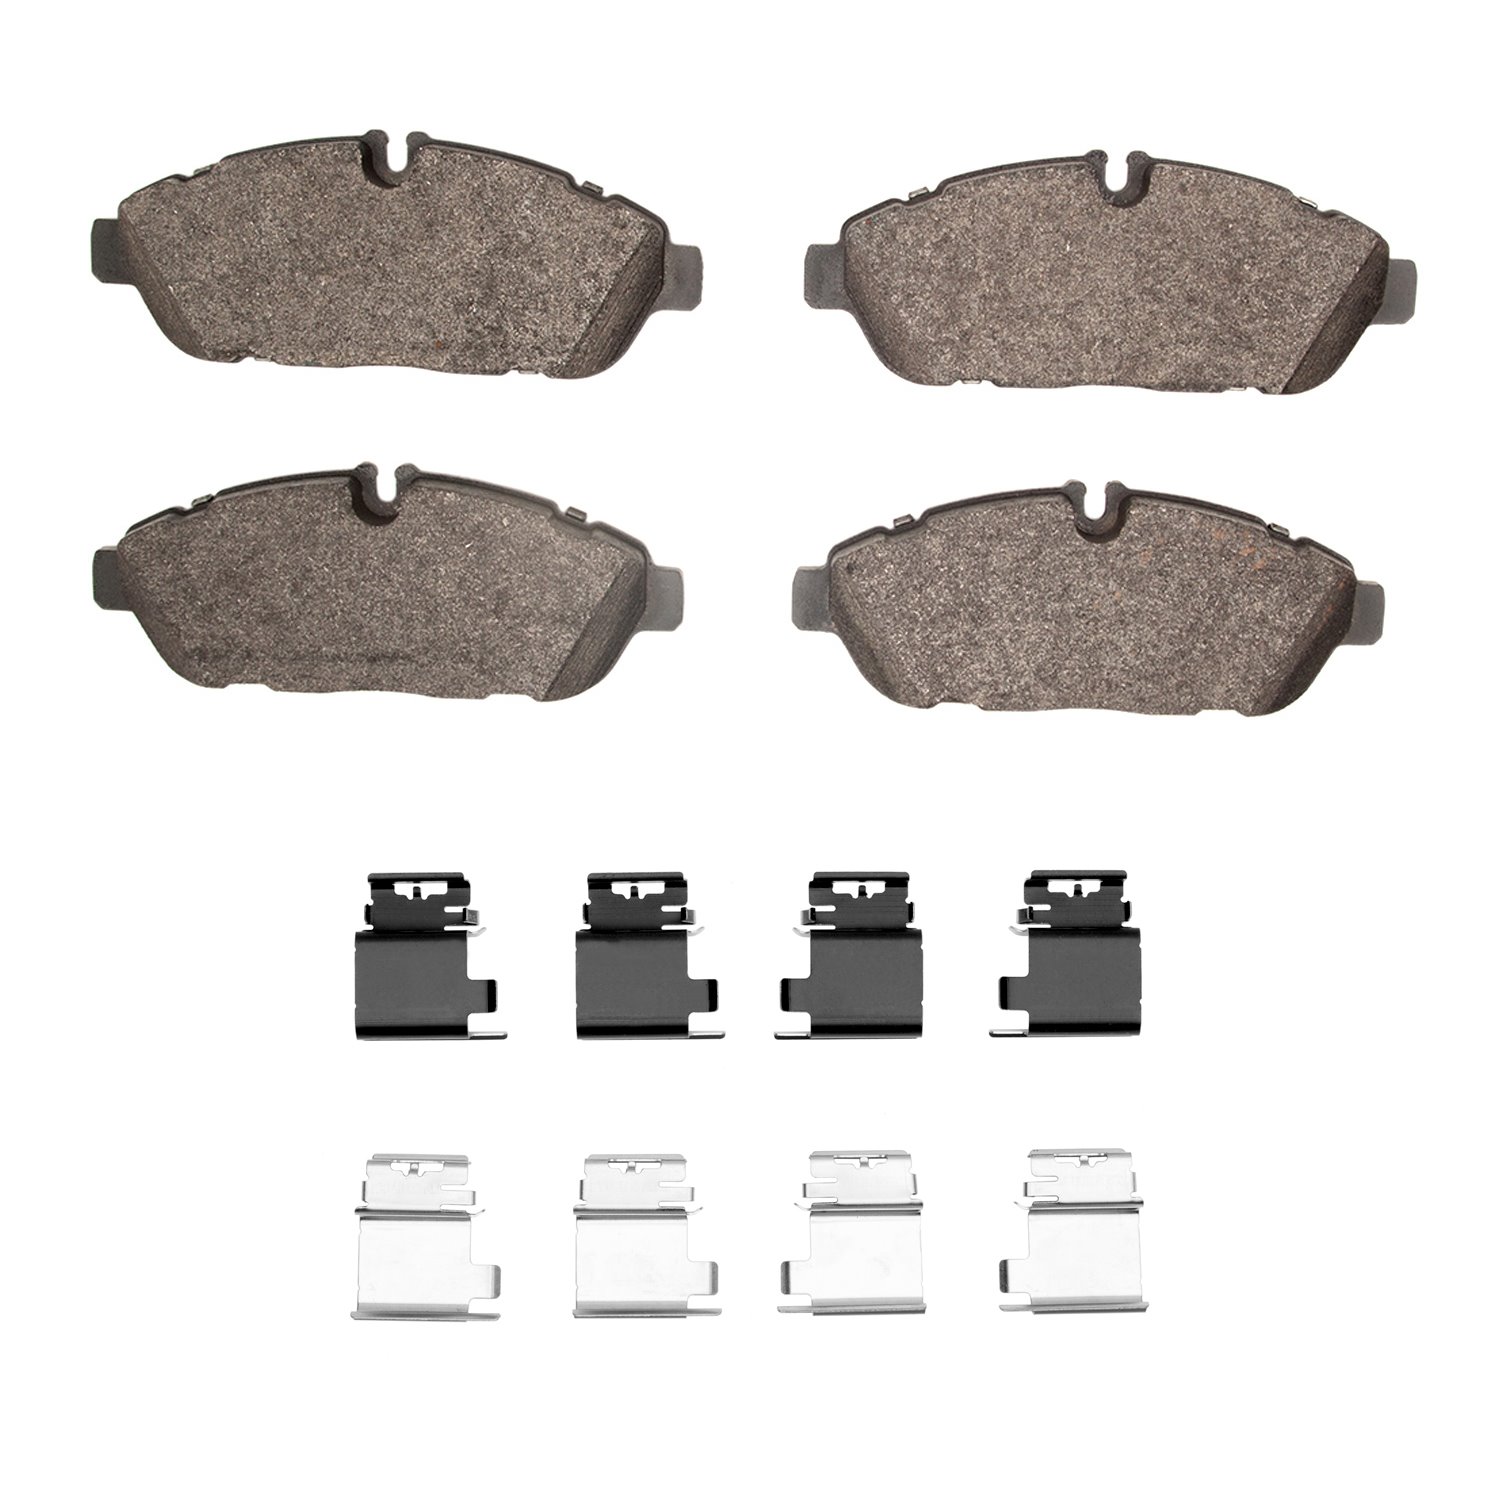 Optimum OE Brake Pads & Hardware Kit, Fits Select Ford/Lincoln/Mercury/Mazda, Position: Front